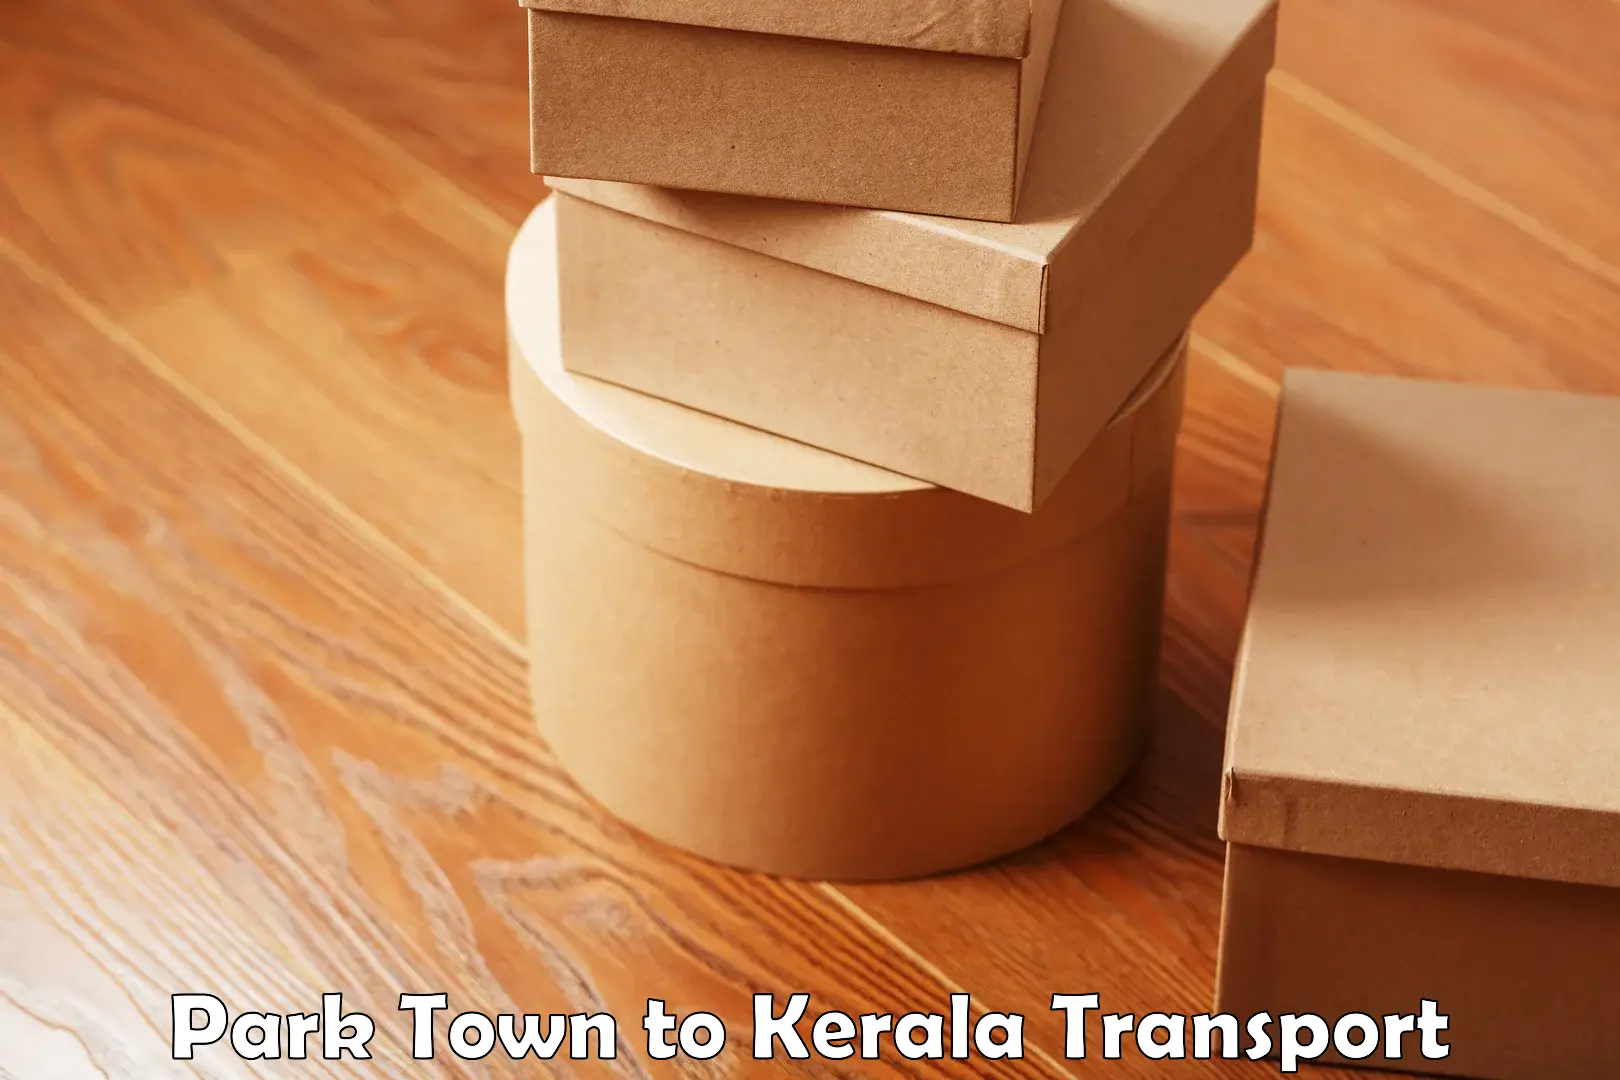 Road transport online services Park Town to Koyilandy